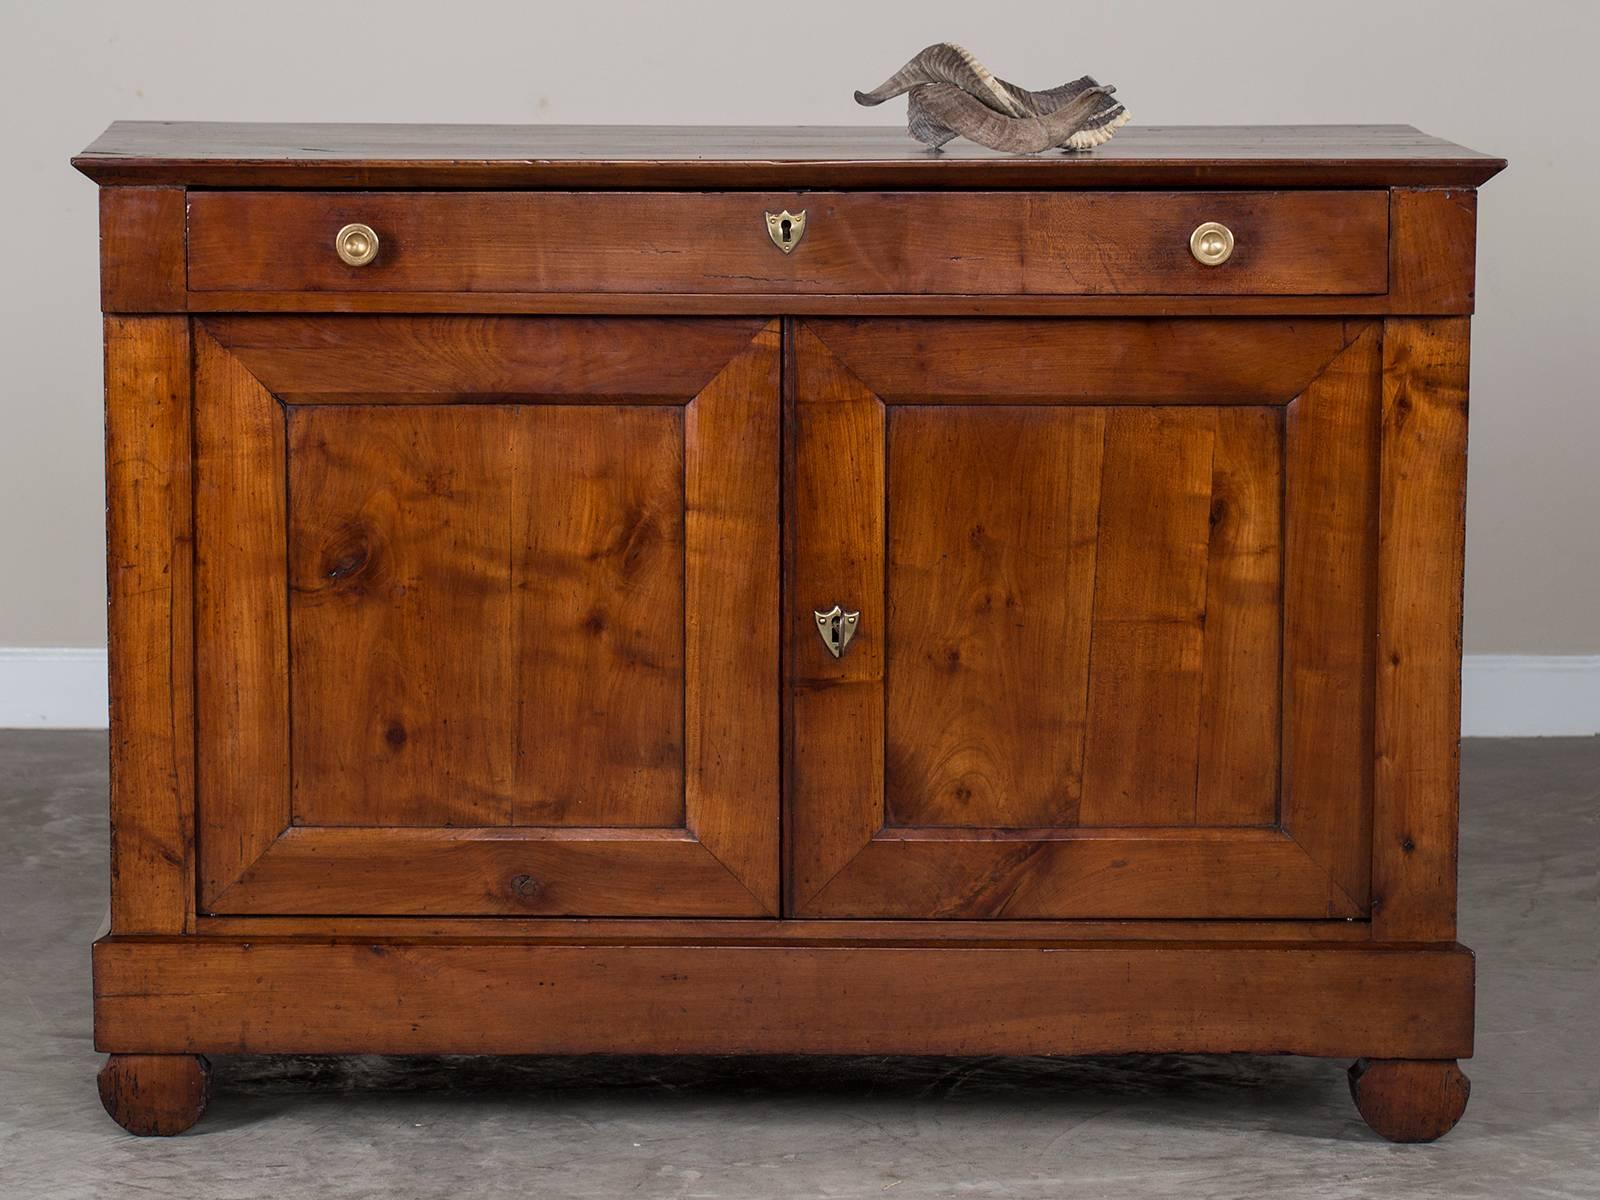 Receive our new selections direct from 1stdibs by email each week. Please click follow dealer below and see them first!

The elegant simplicity of this antique country French buffet circa 1830 gives it a modern appeal. Dating from the Restauration